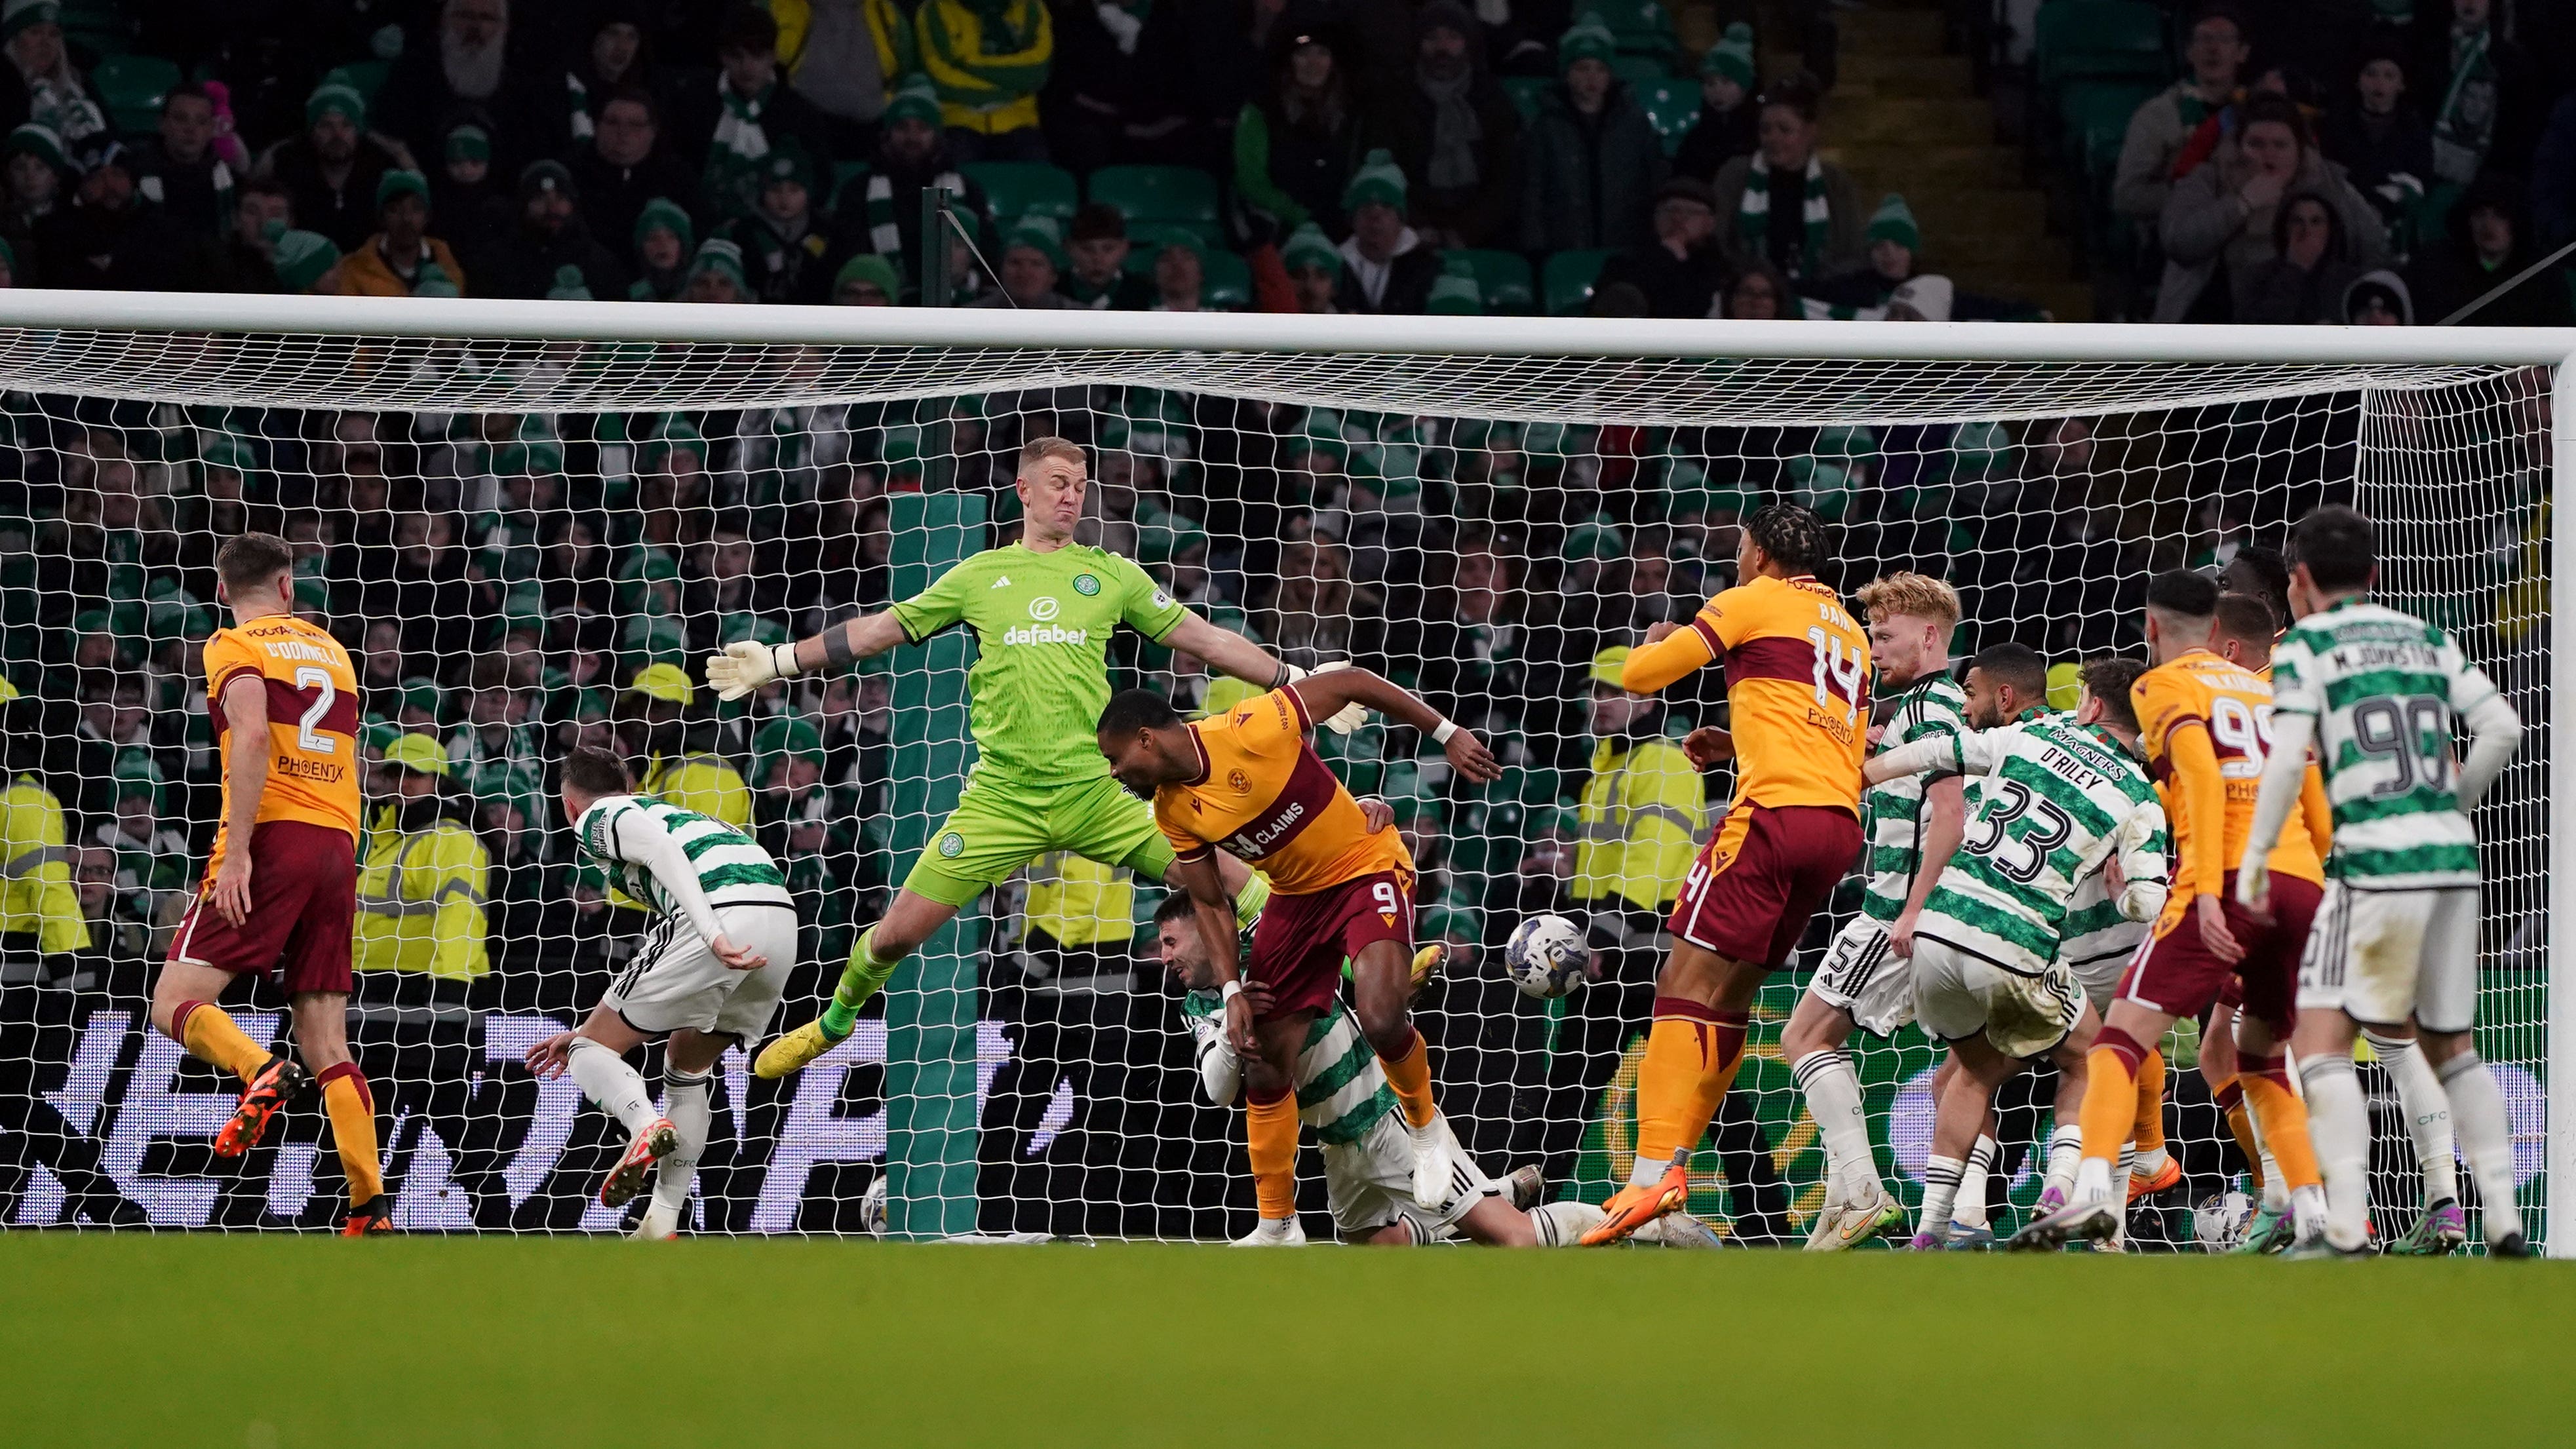 Jonathan Obika’s last-gasp equaliser earns Motherwell point at Celtic